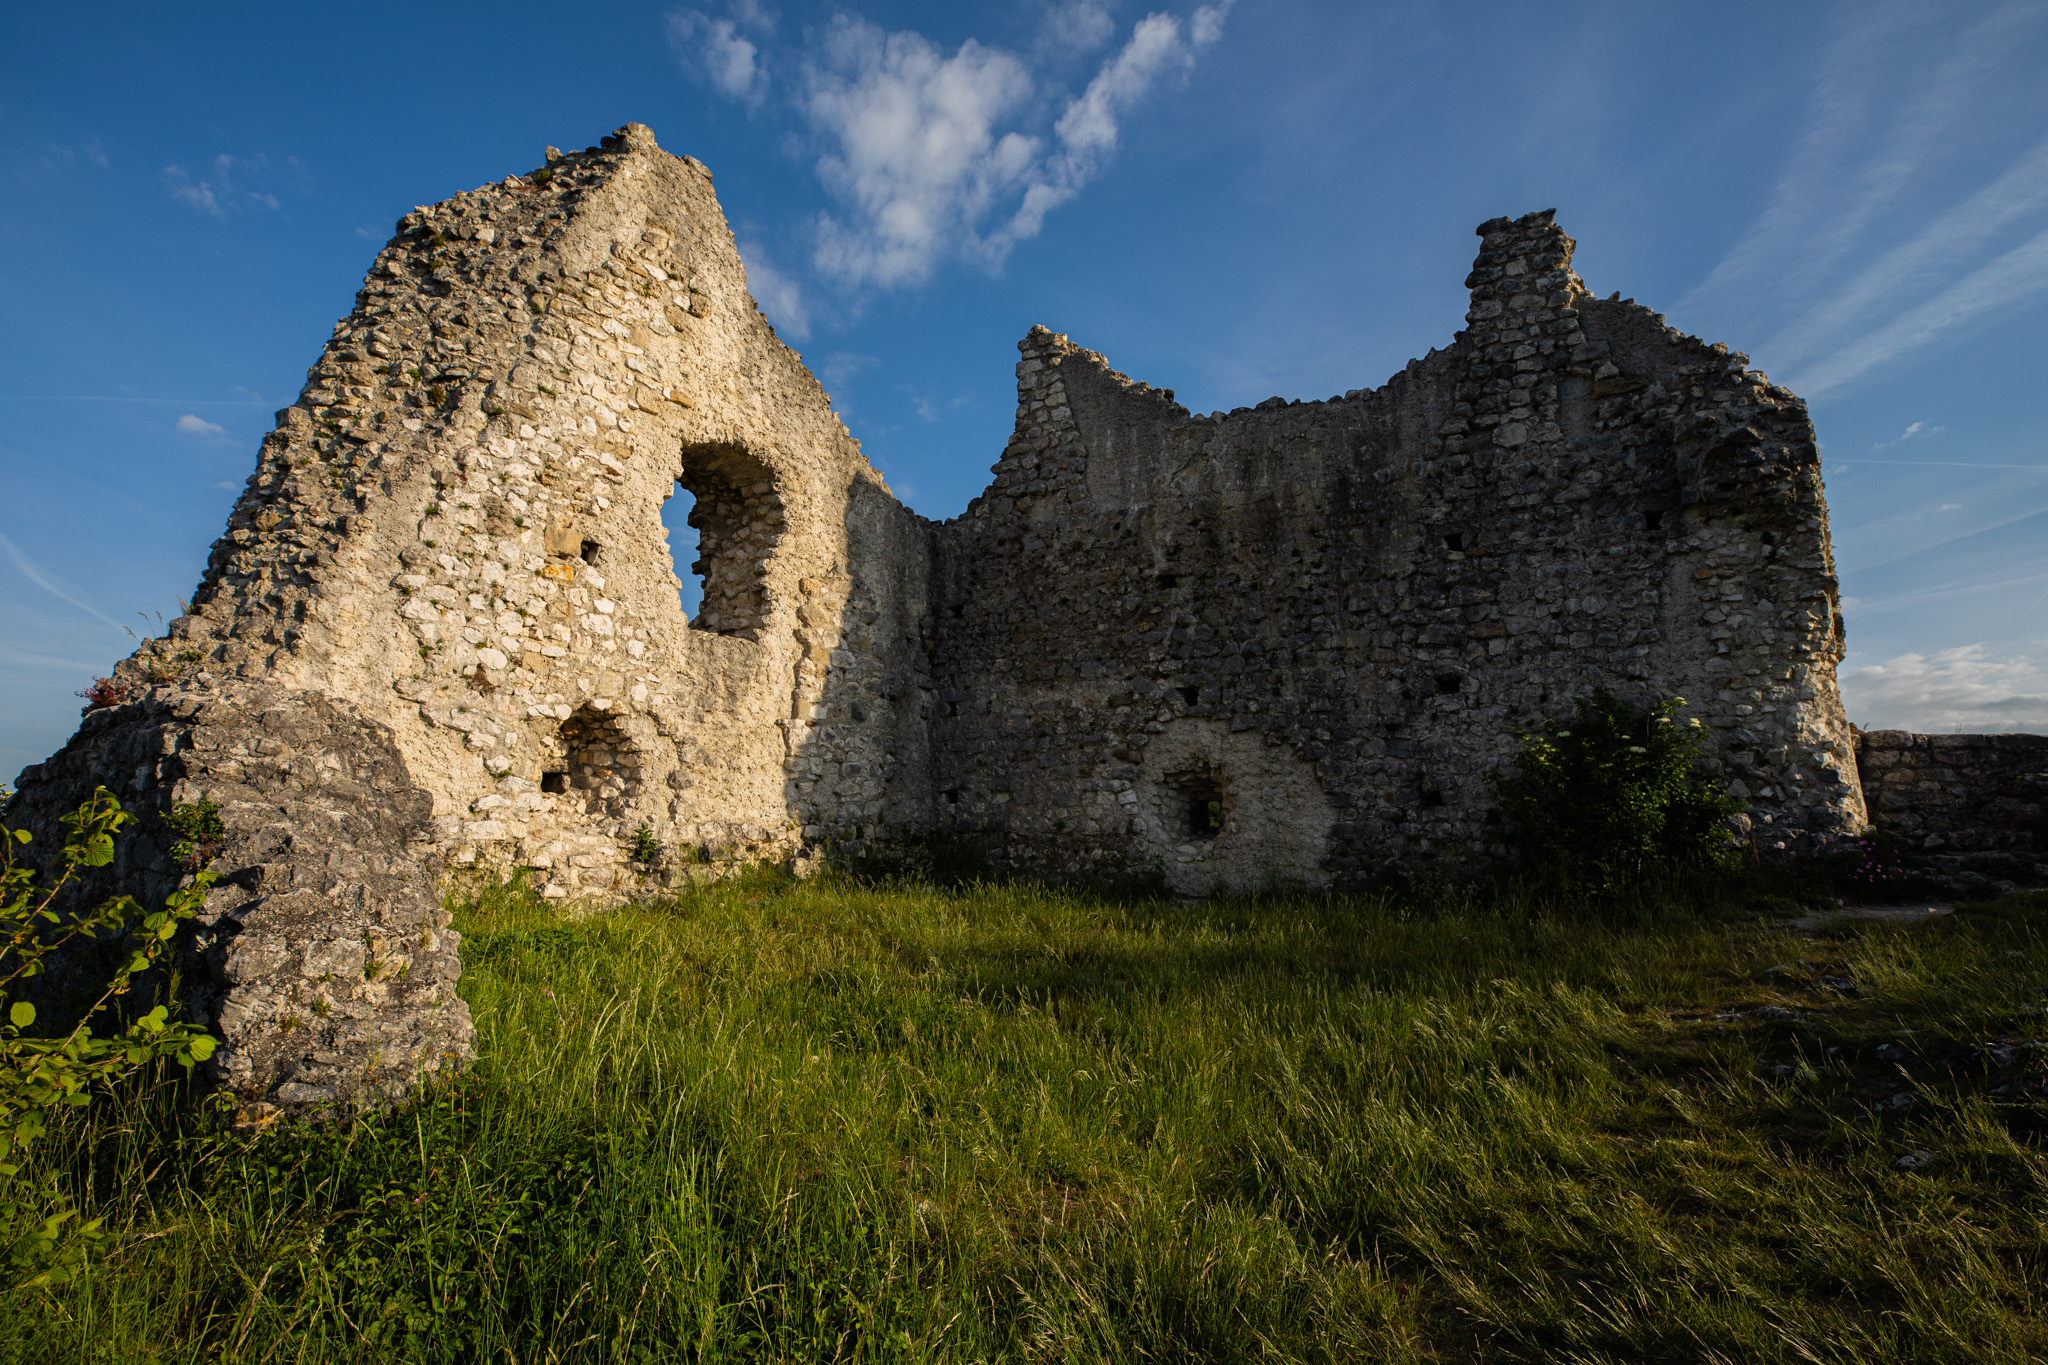 General 2048x1365 photography outdoors nature castle fort grass greenery field ruins history sky clouds